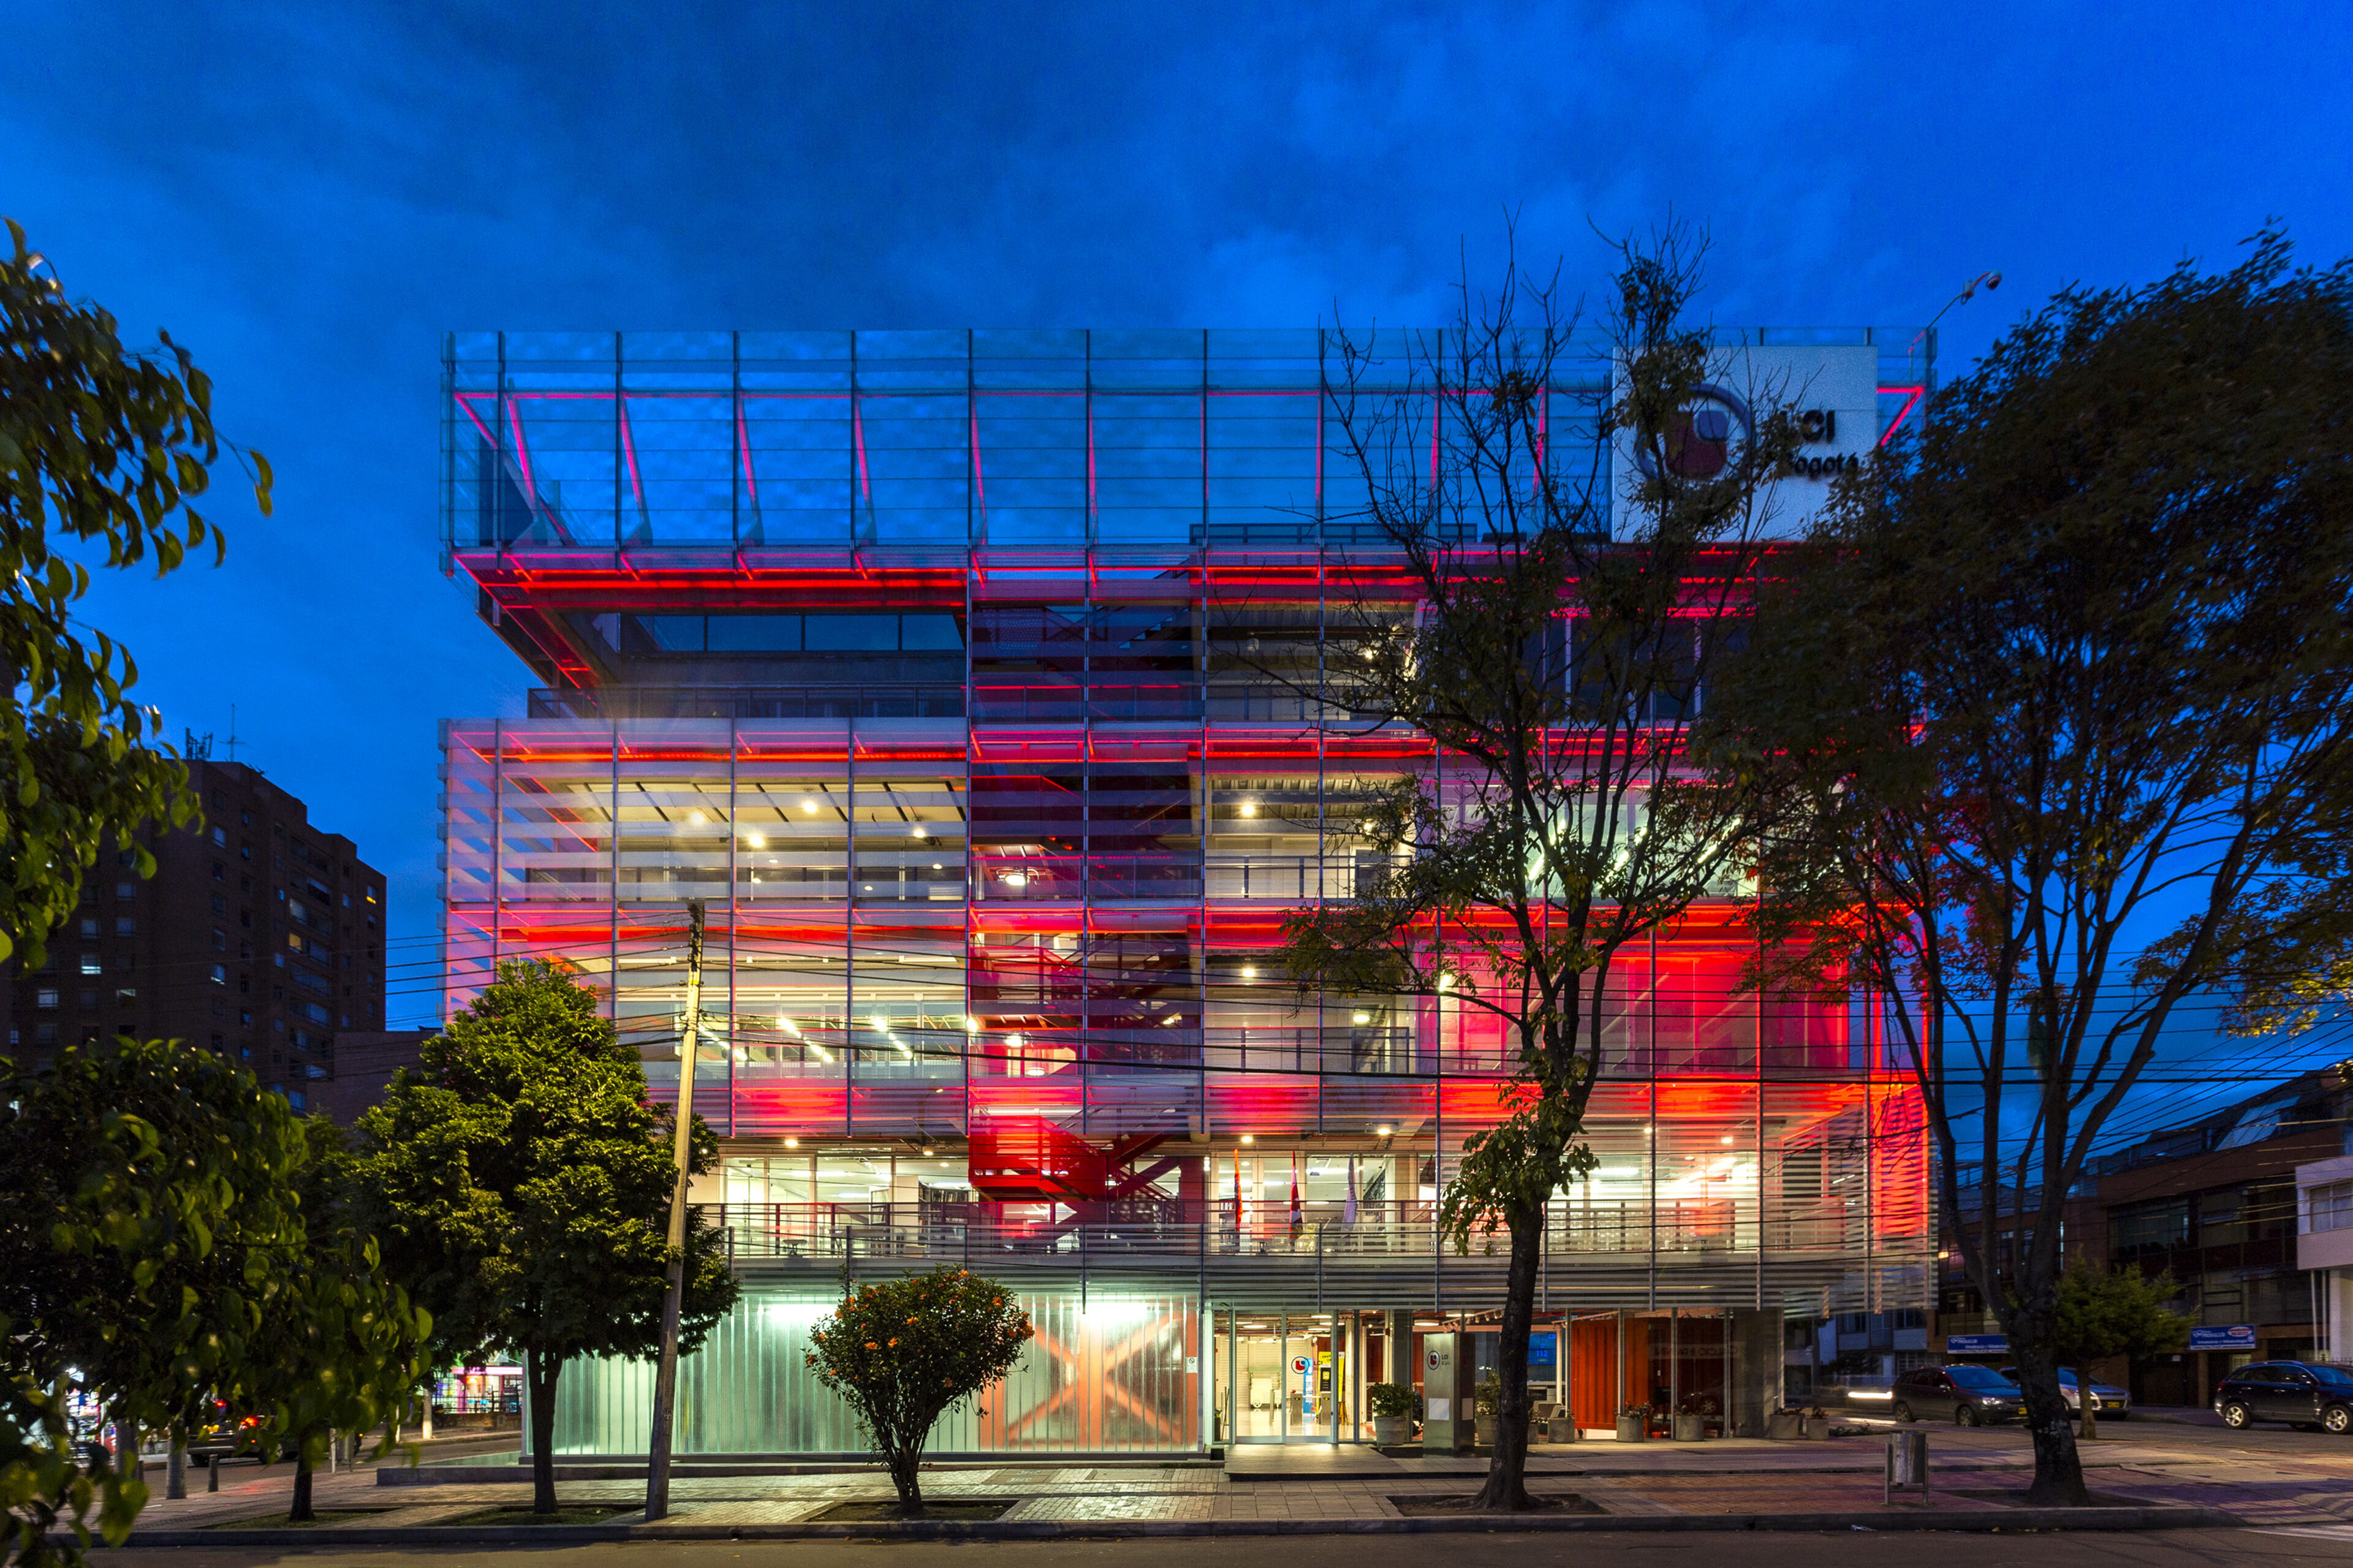 A contemporary building bathed in vibrant red lighting stands out against the evening sky, its glass facade reflecting the ambient city light.